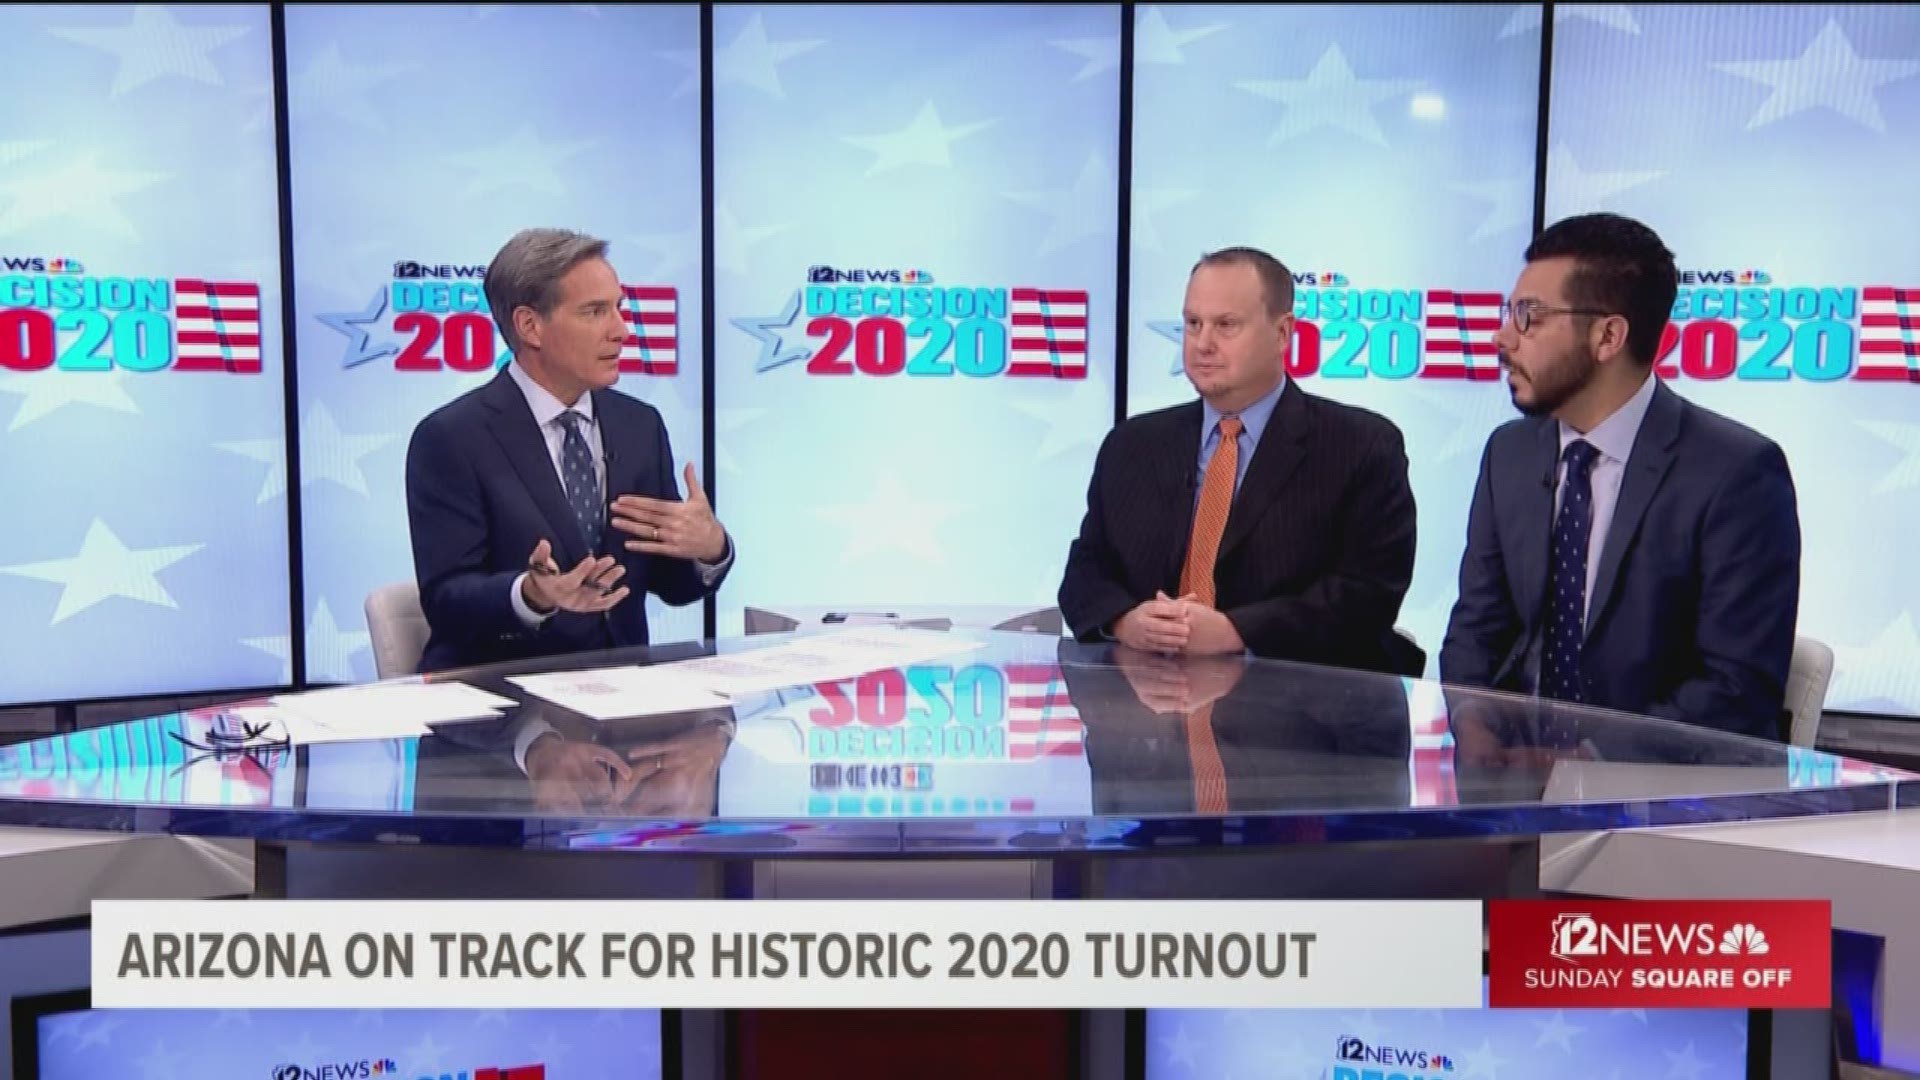 Our data experts explain who the new voters are and whether younger voters can make a difference in 2020. What role will the “Purple Loop” play?